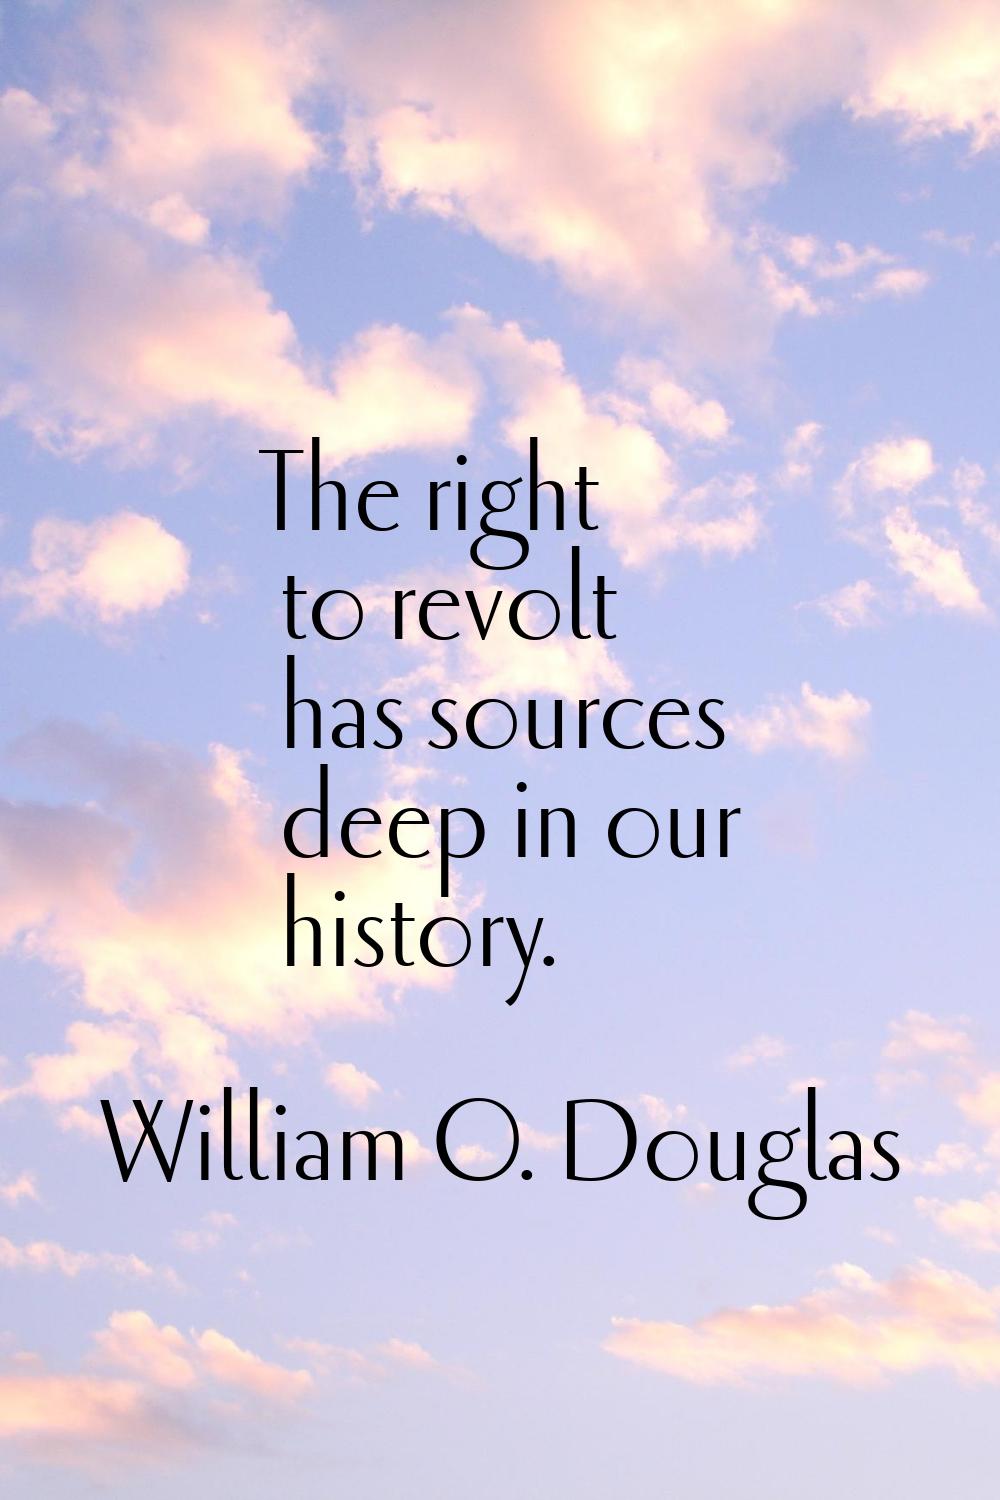 The right to revolt has sources deep in our history.